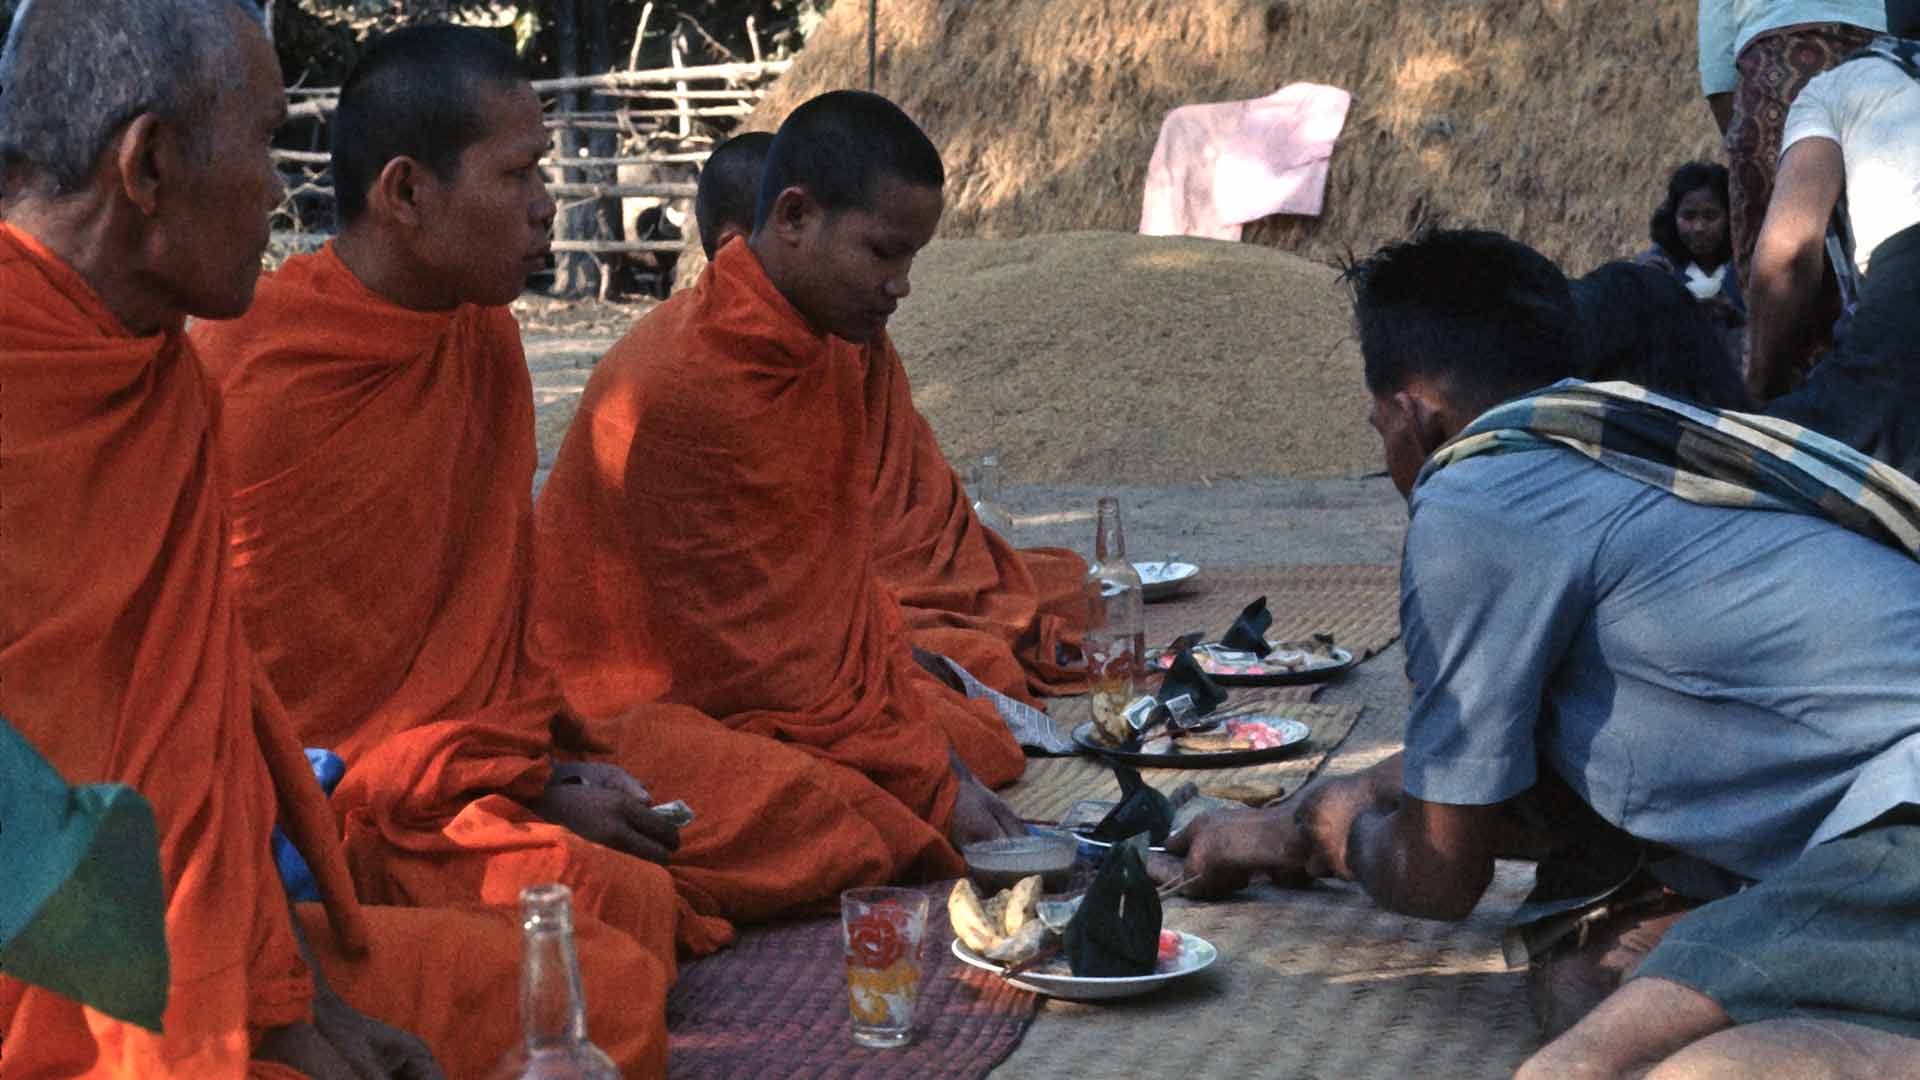 A man presents a dish of food to seated monks